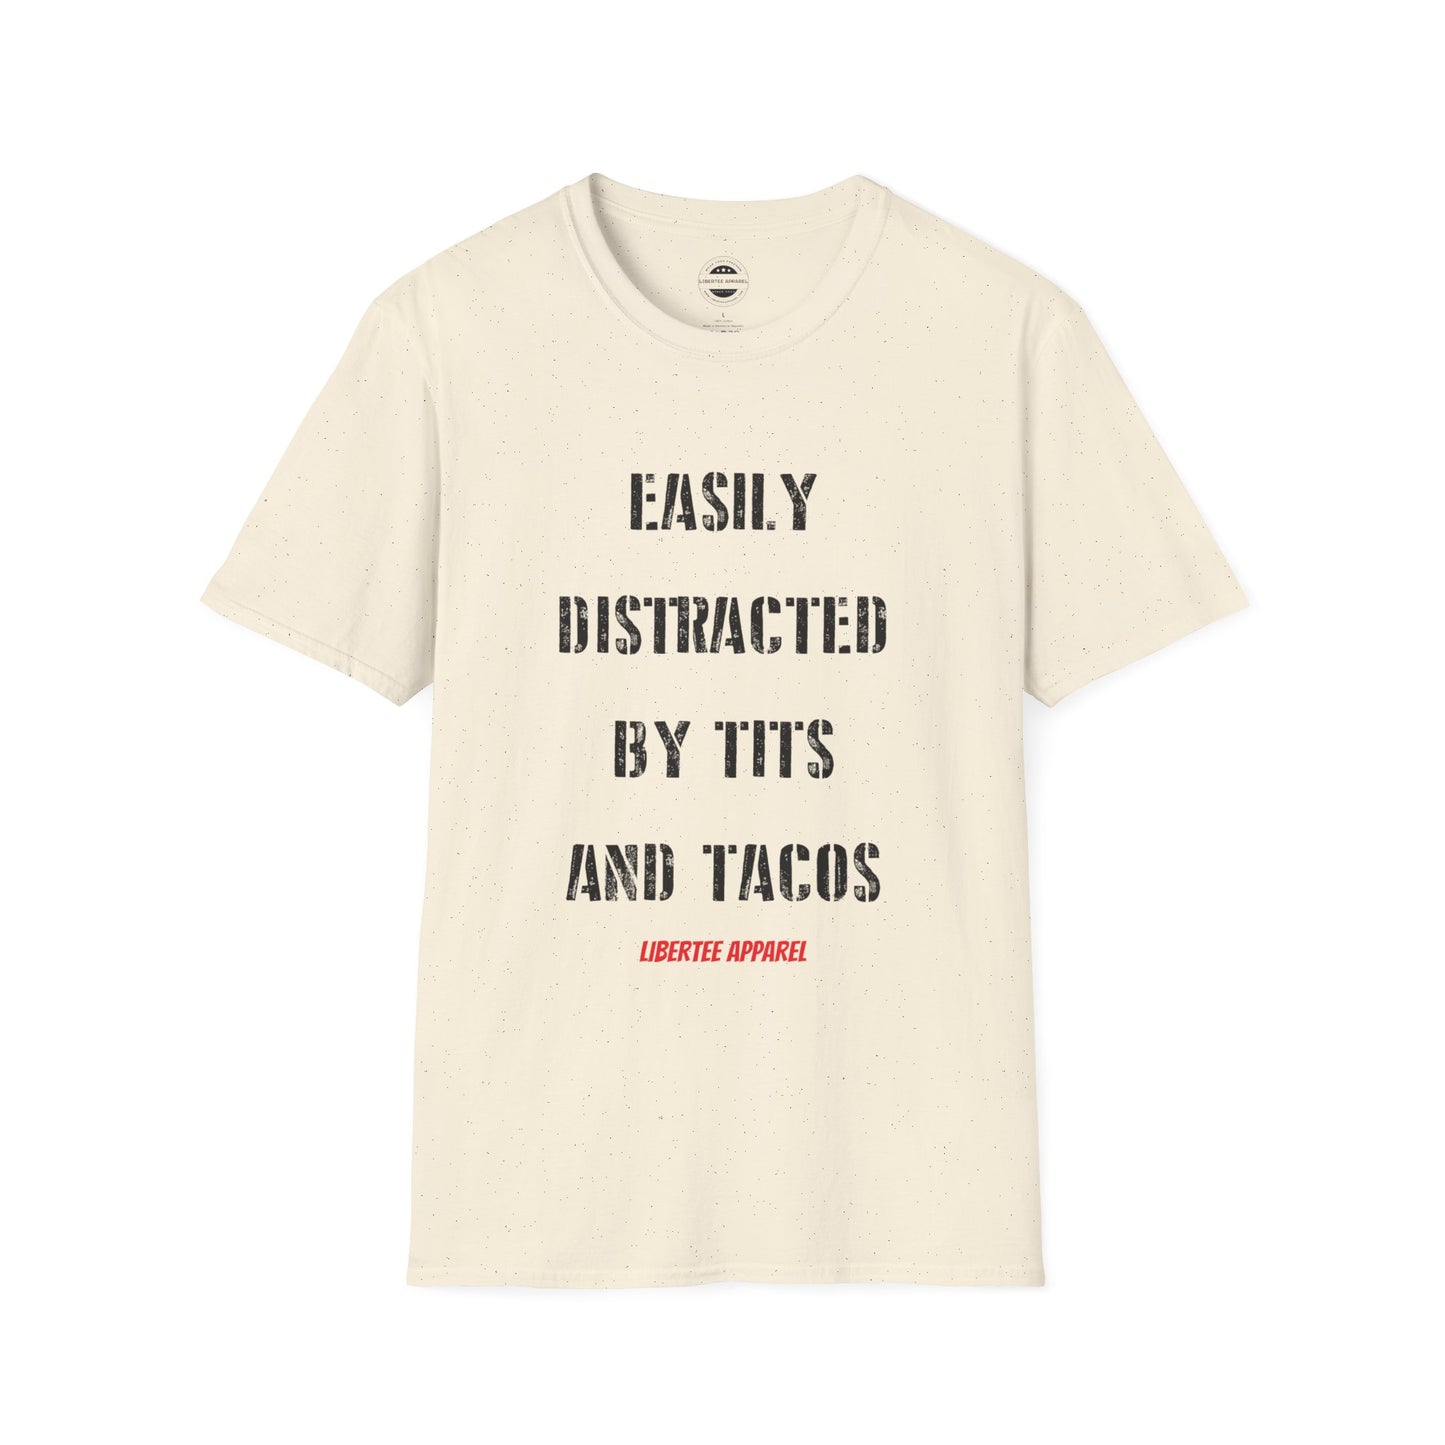 Easily Distracted By Tits And Tacos